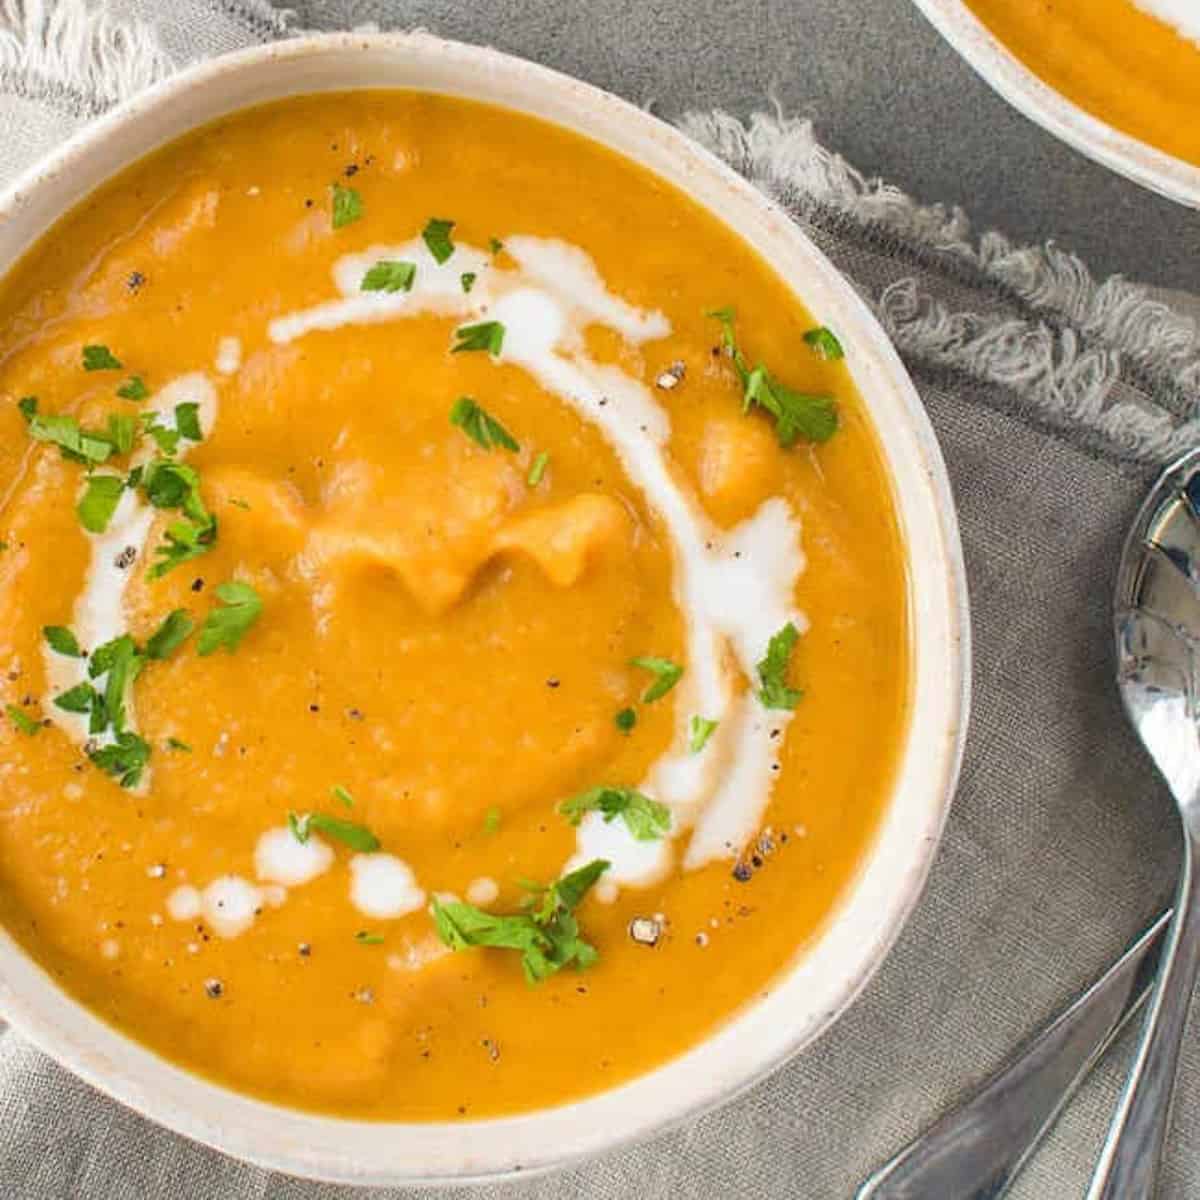 Sweep potato and pumpkin soup garnished with swirls of cream.